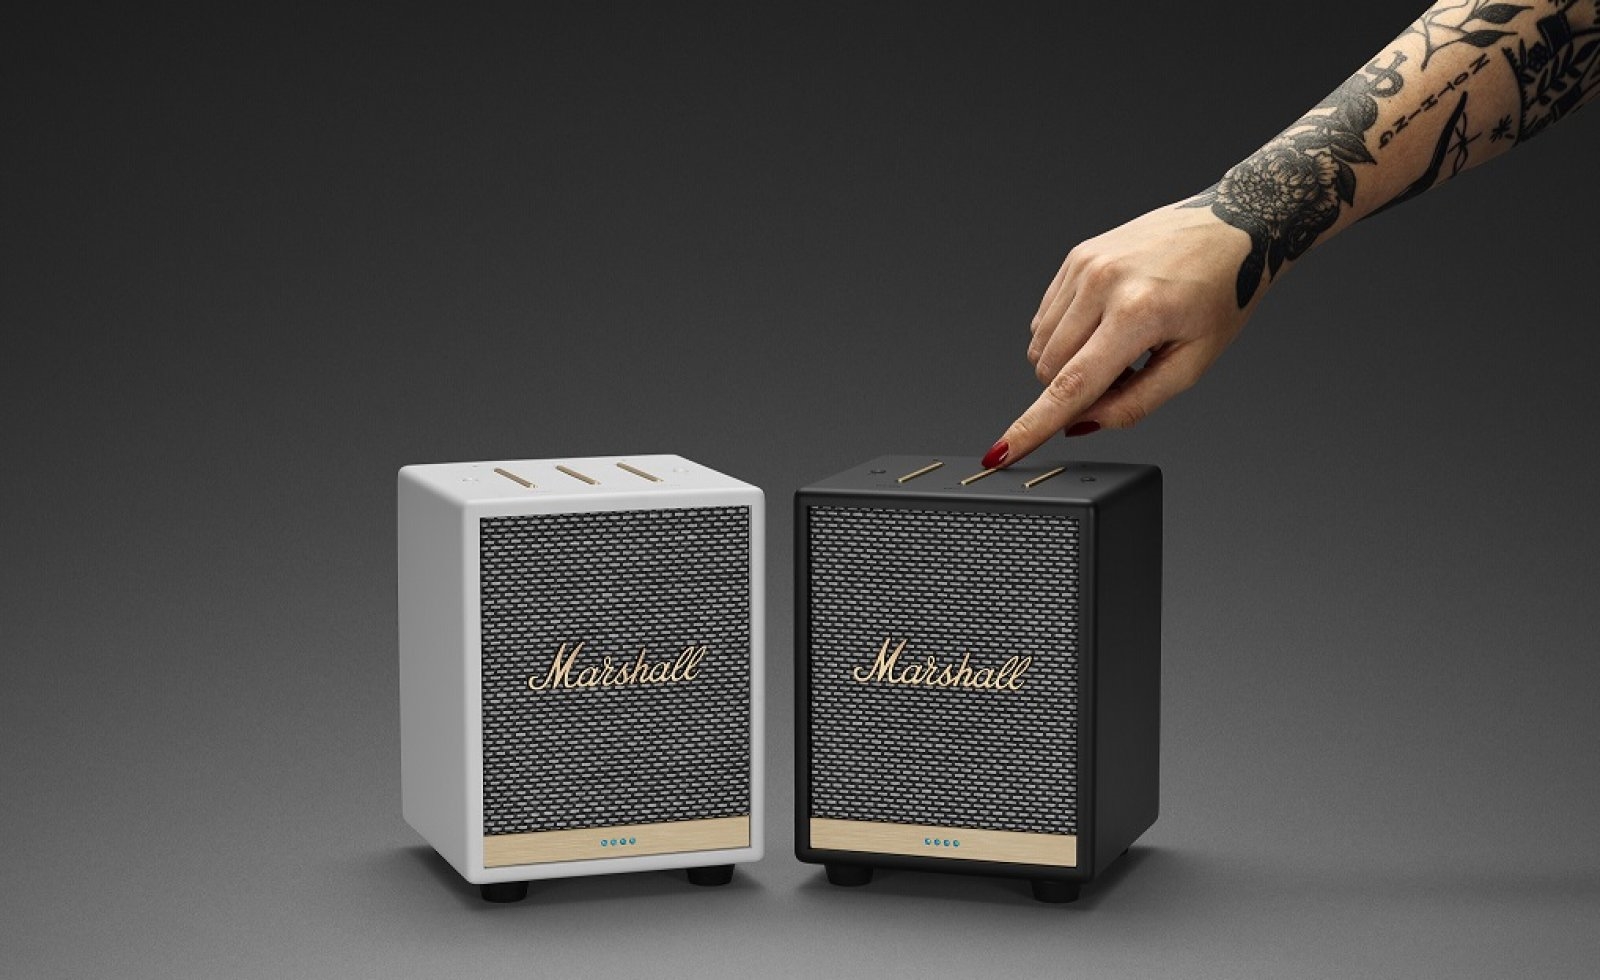 Marshall's latest Alexa smart speaker is a compact cube | DeviceDaily.com